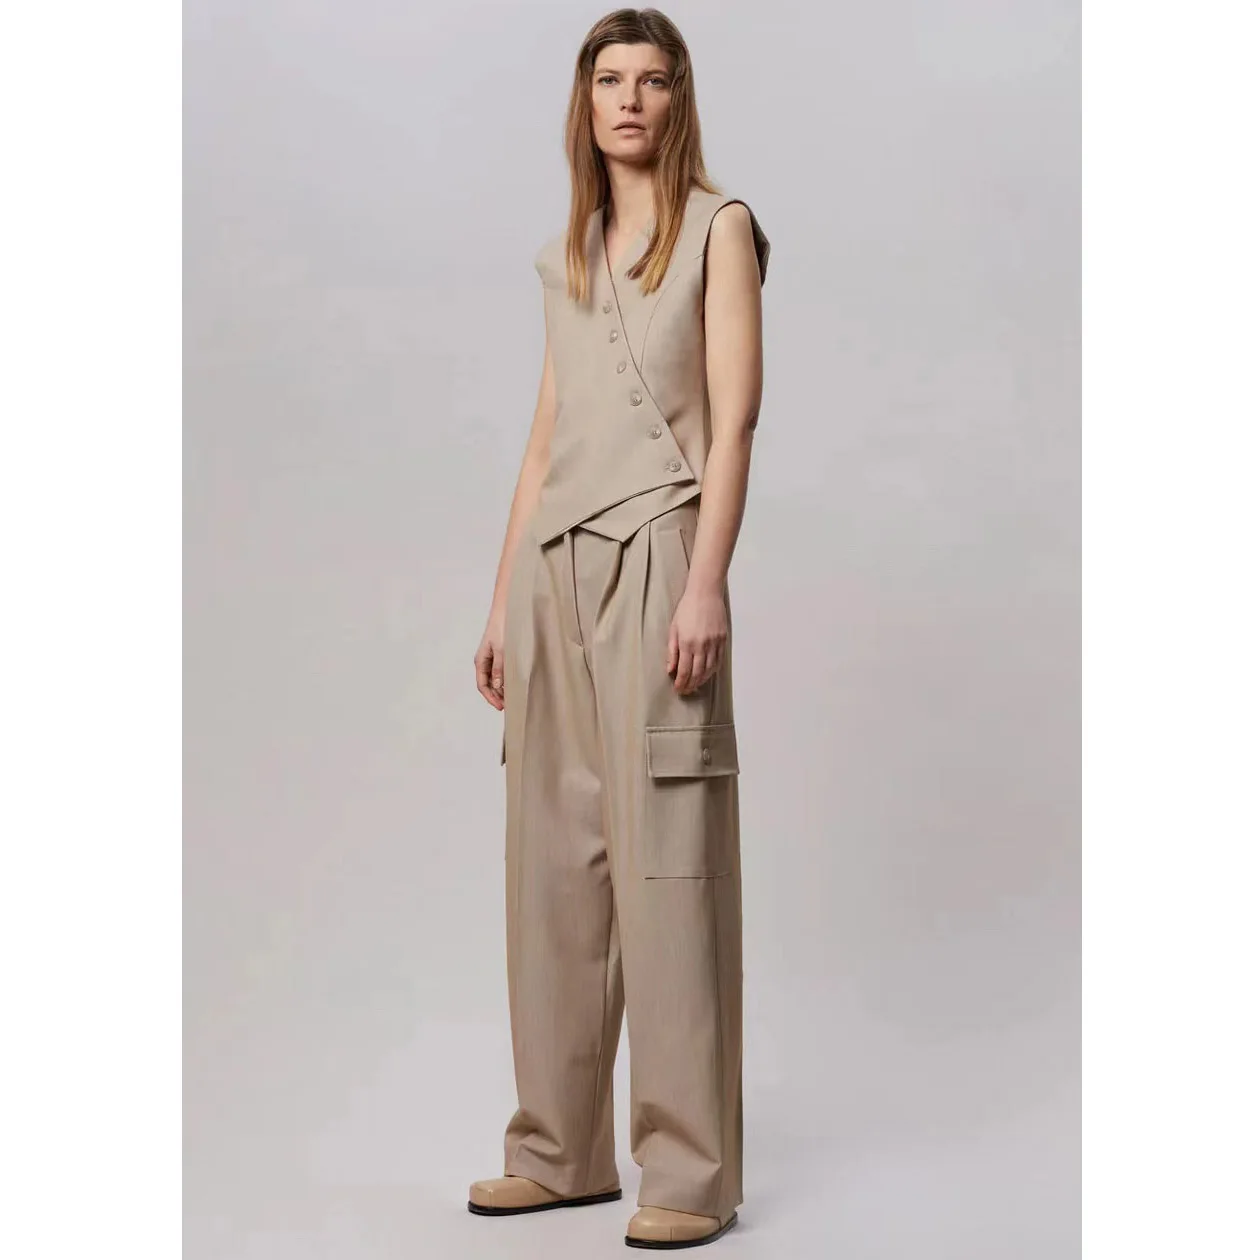 Fr@nkieShop Trousers Women Loose Casual Street Popular Multi-pocket Overalls Harajuku Style Trousers Straight Mopping Pants